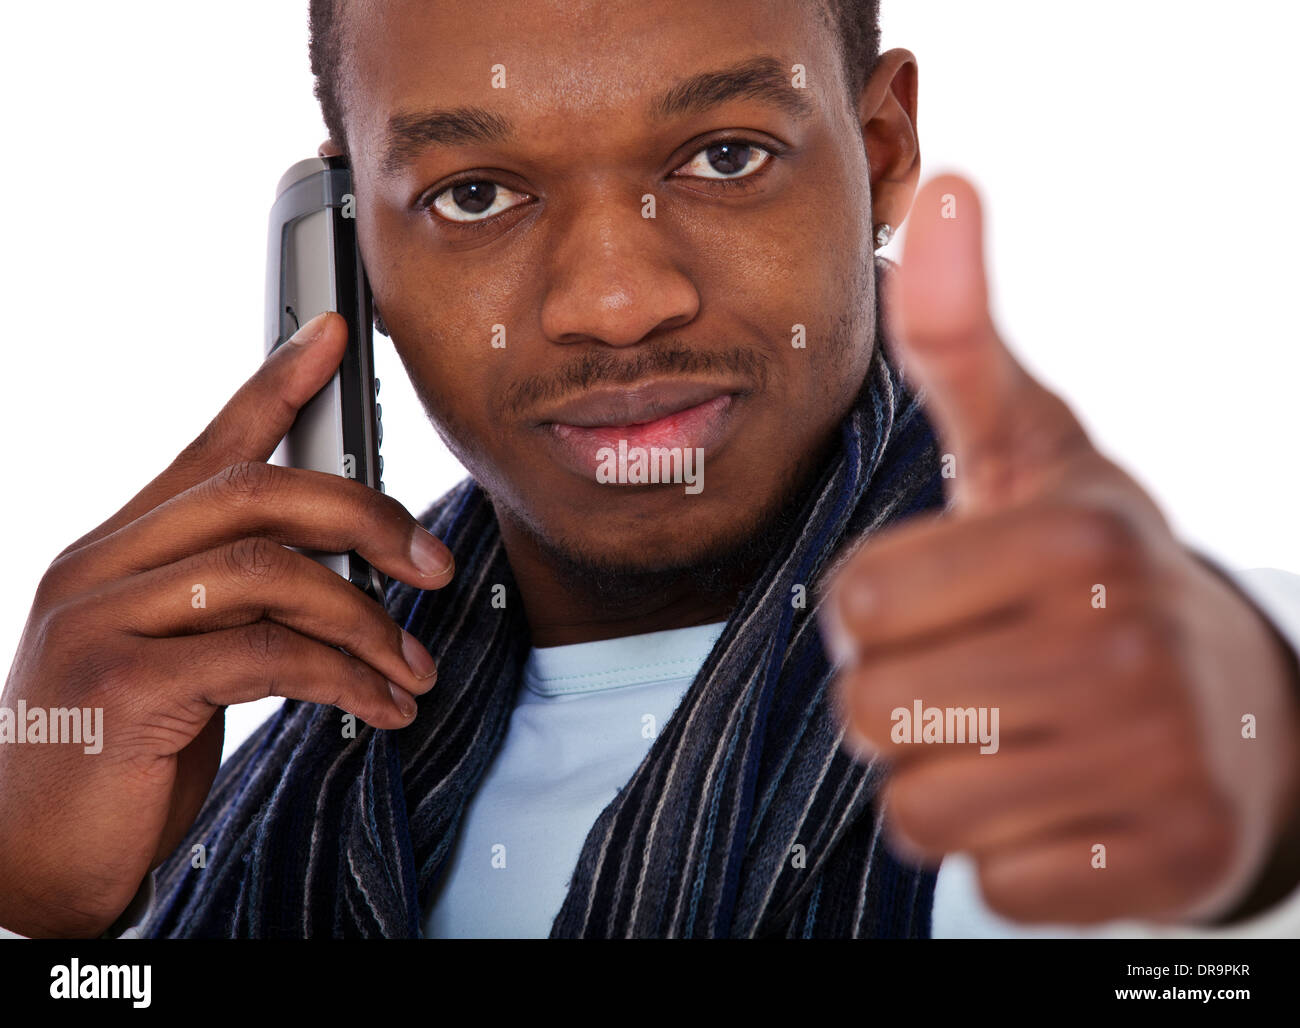 Black guy taking a phone call and shows thumbs up. Stock Photo